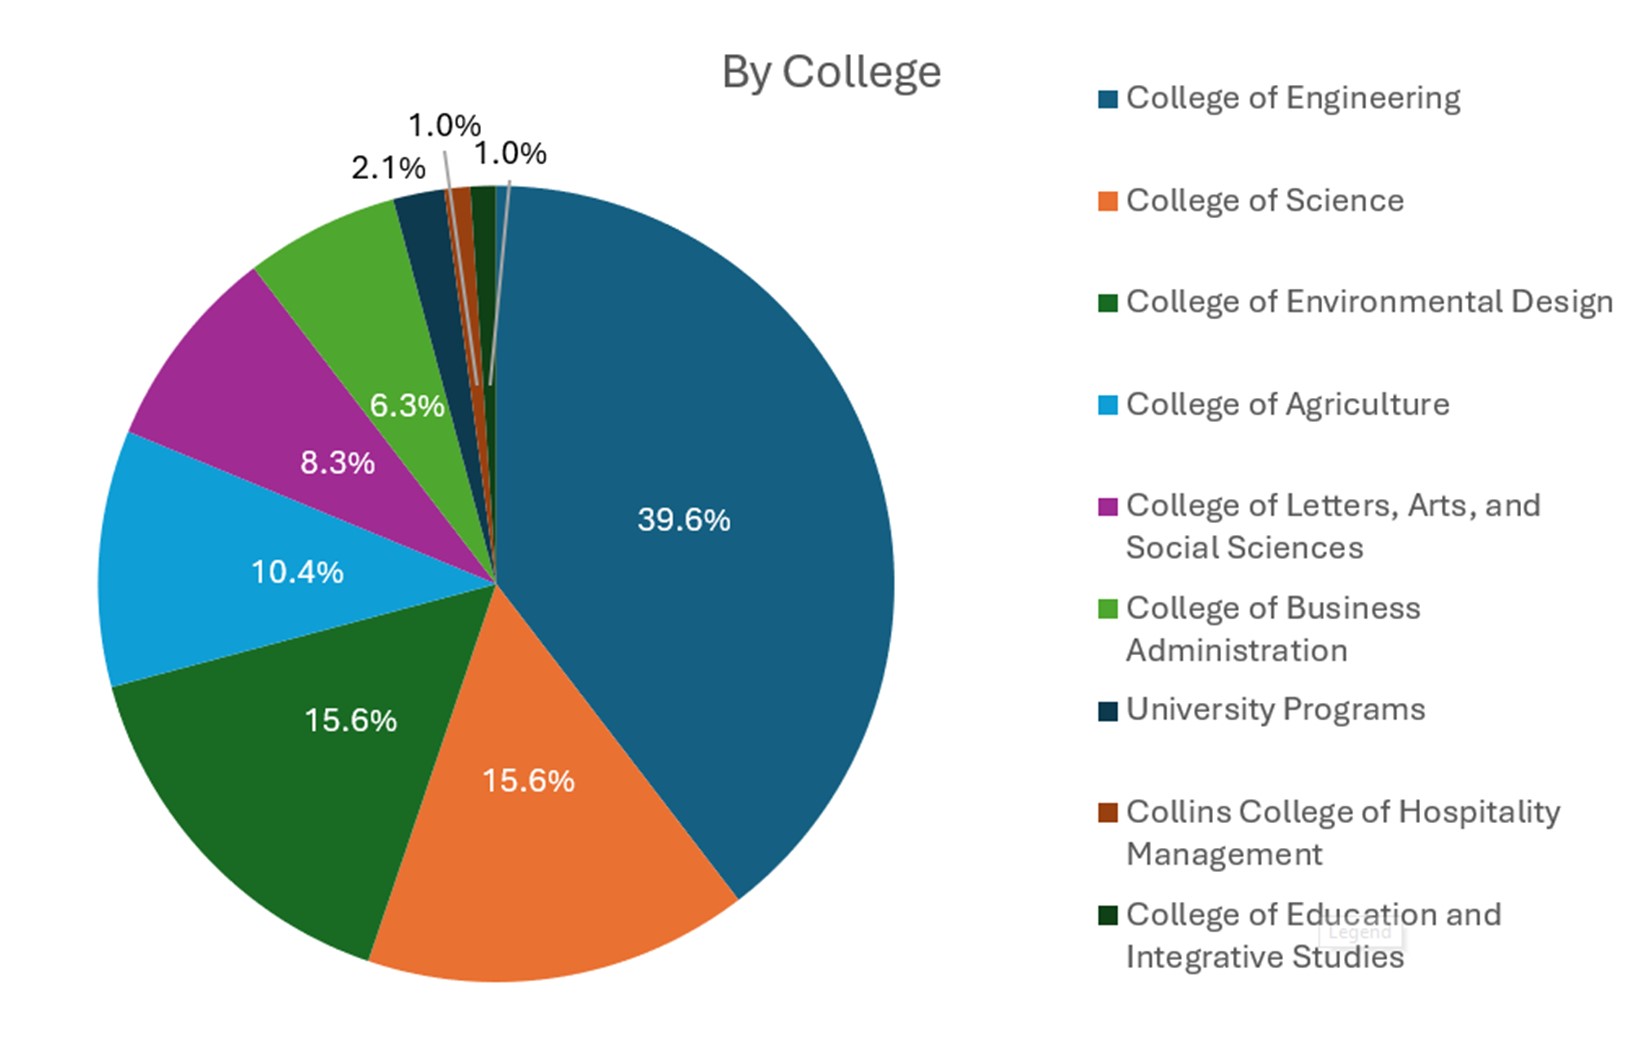 Graph showing the breakdown of representation as percentages from each college